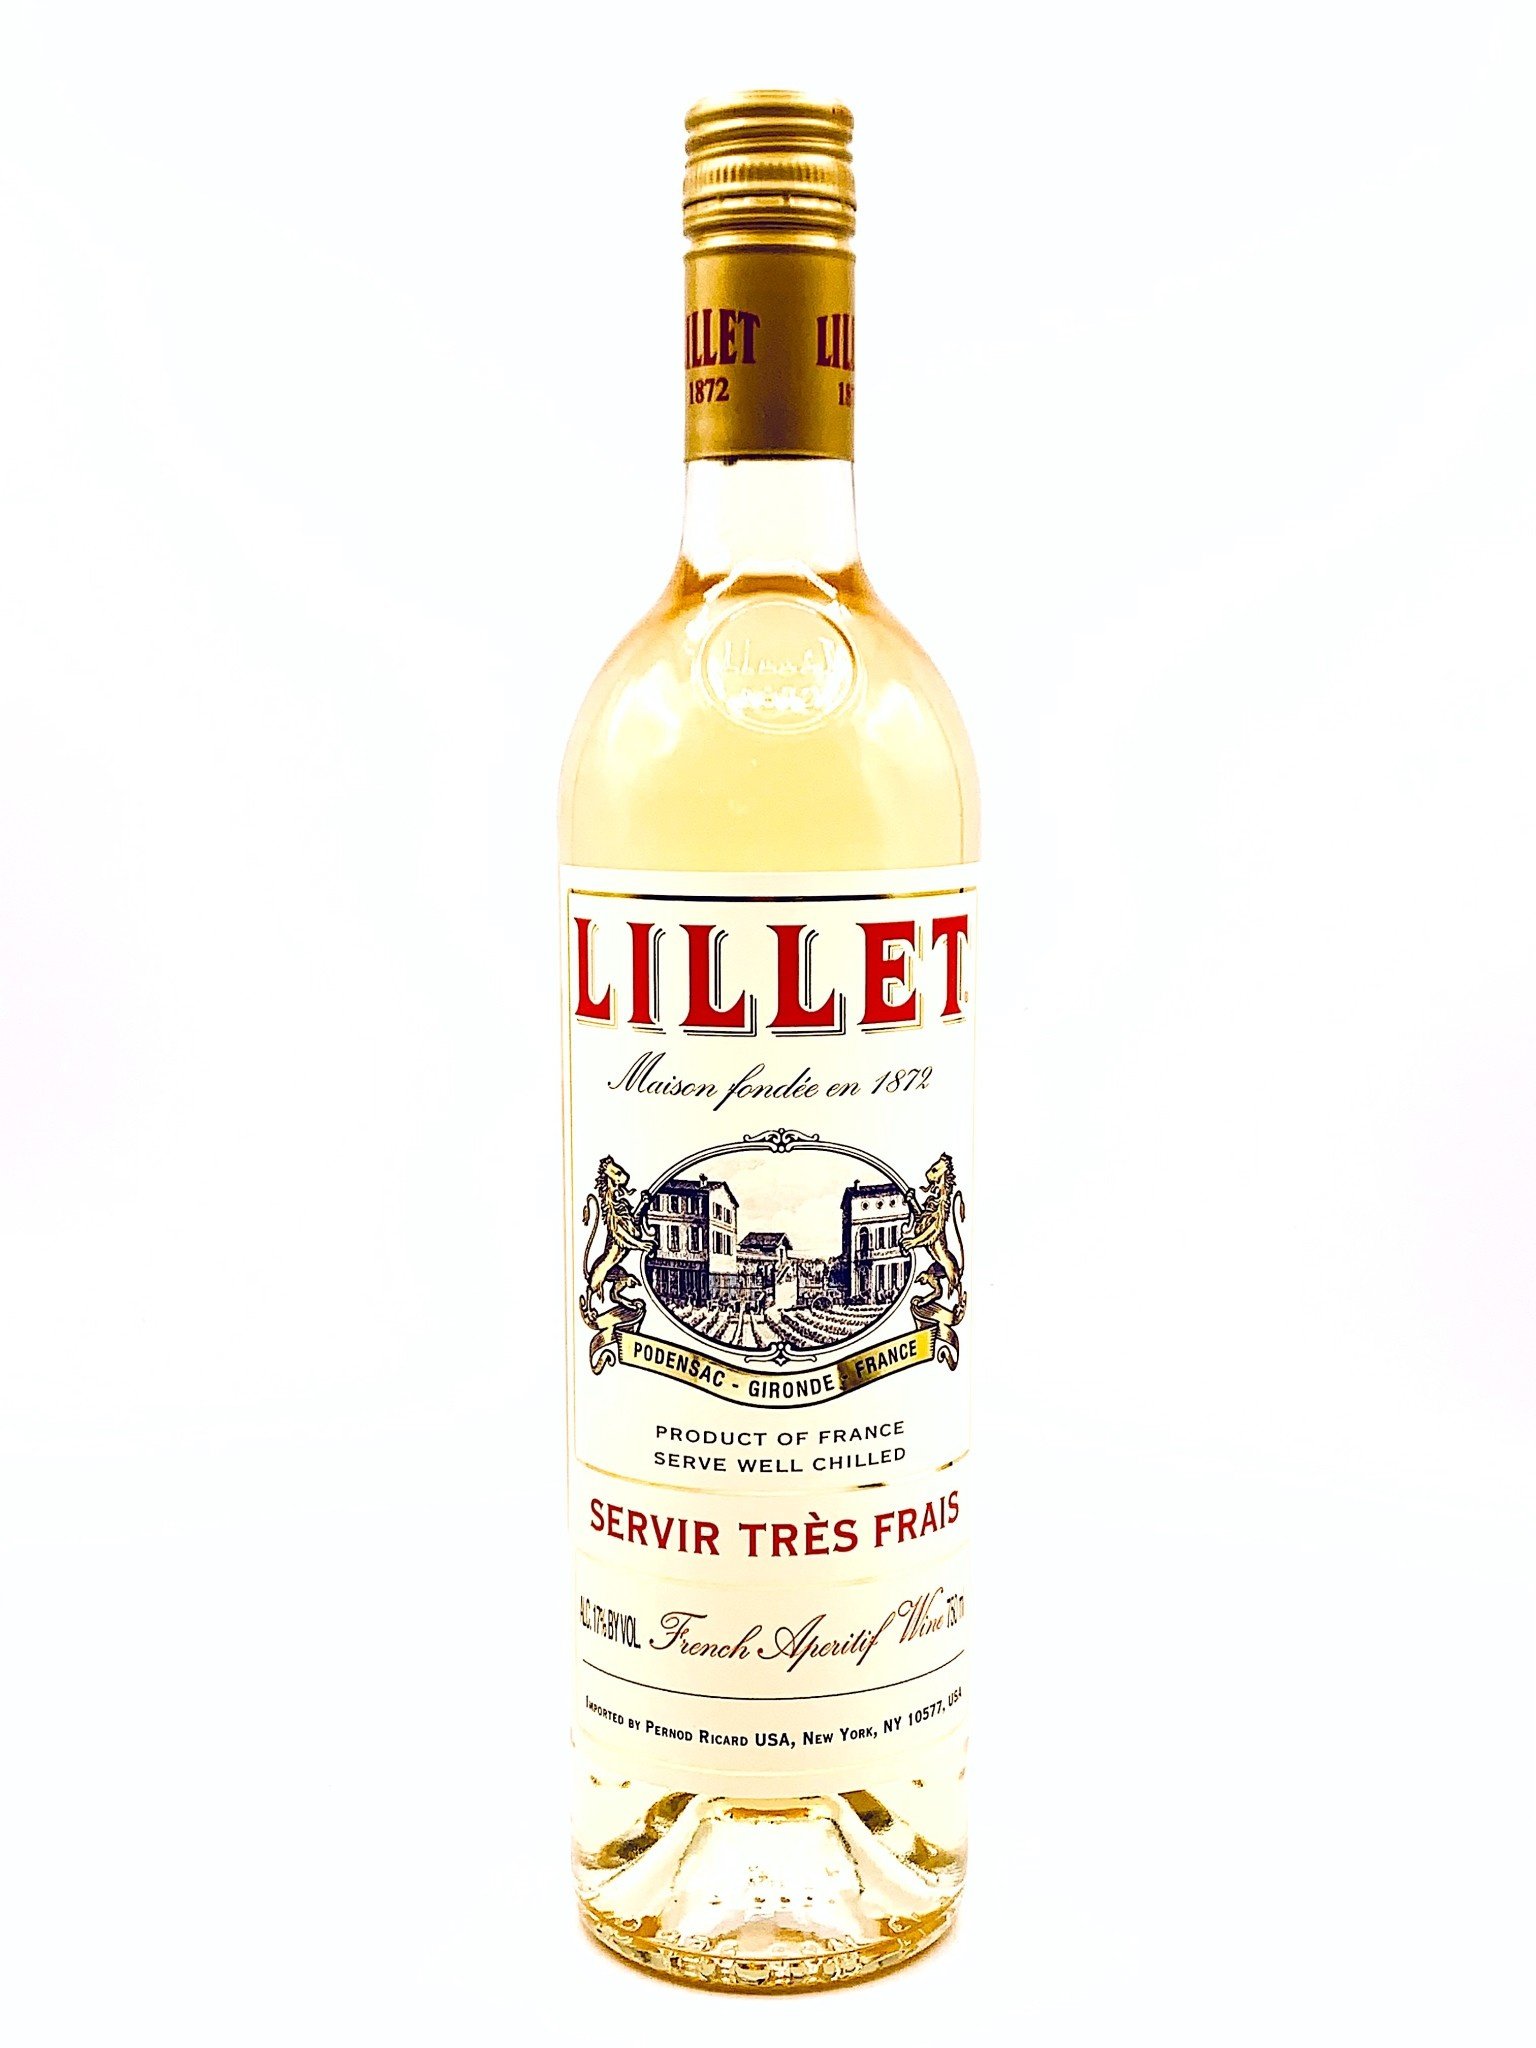 NYC Aperitif - 750ml French Blonde THE Lillet WINERY